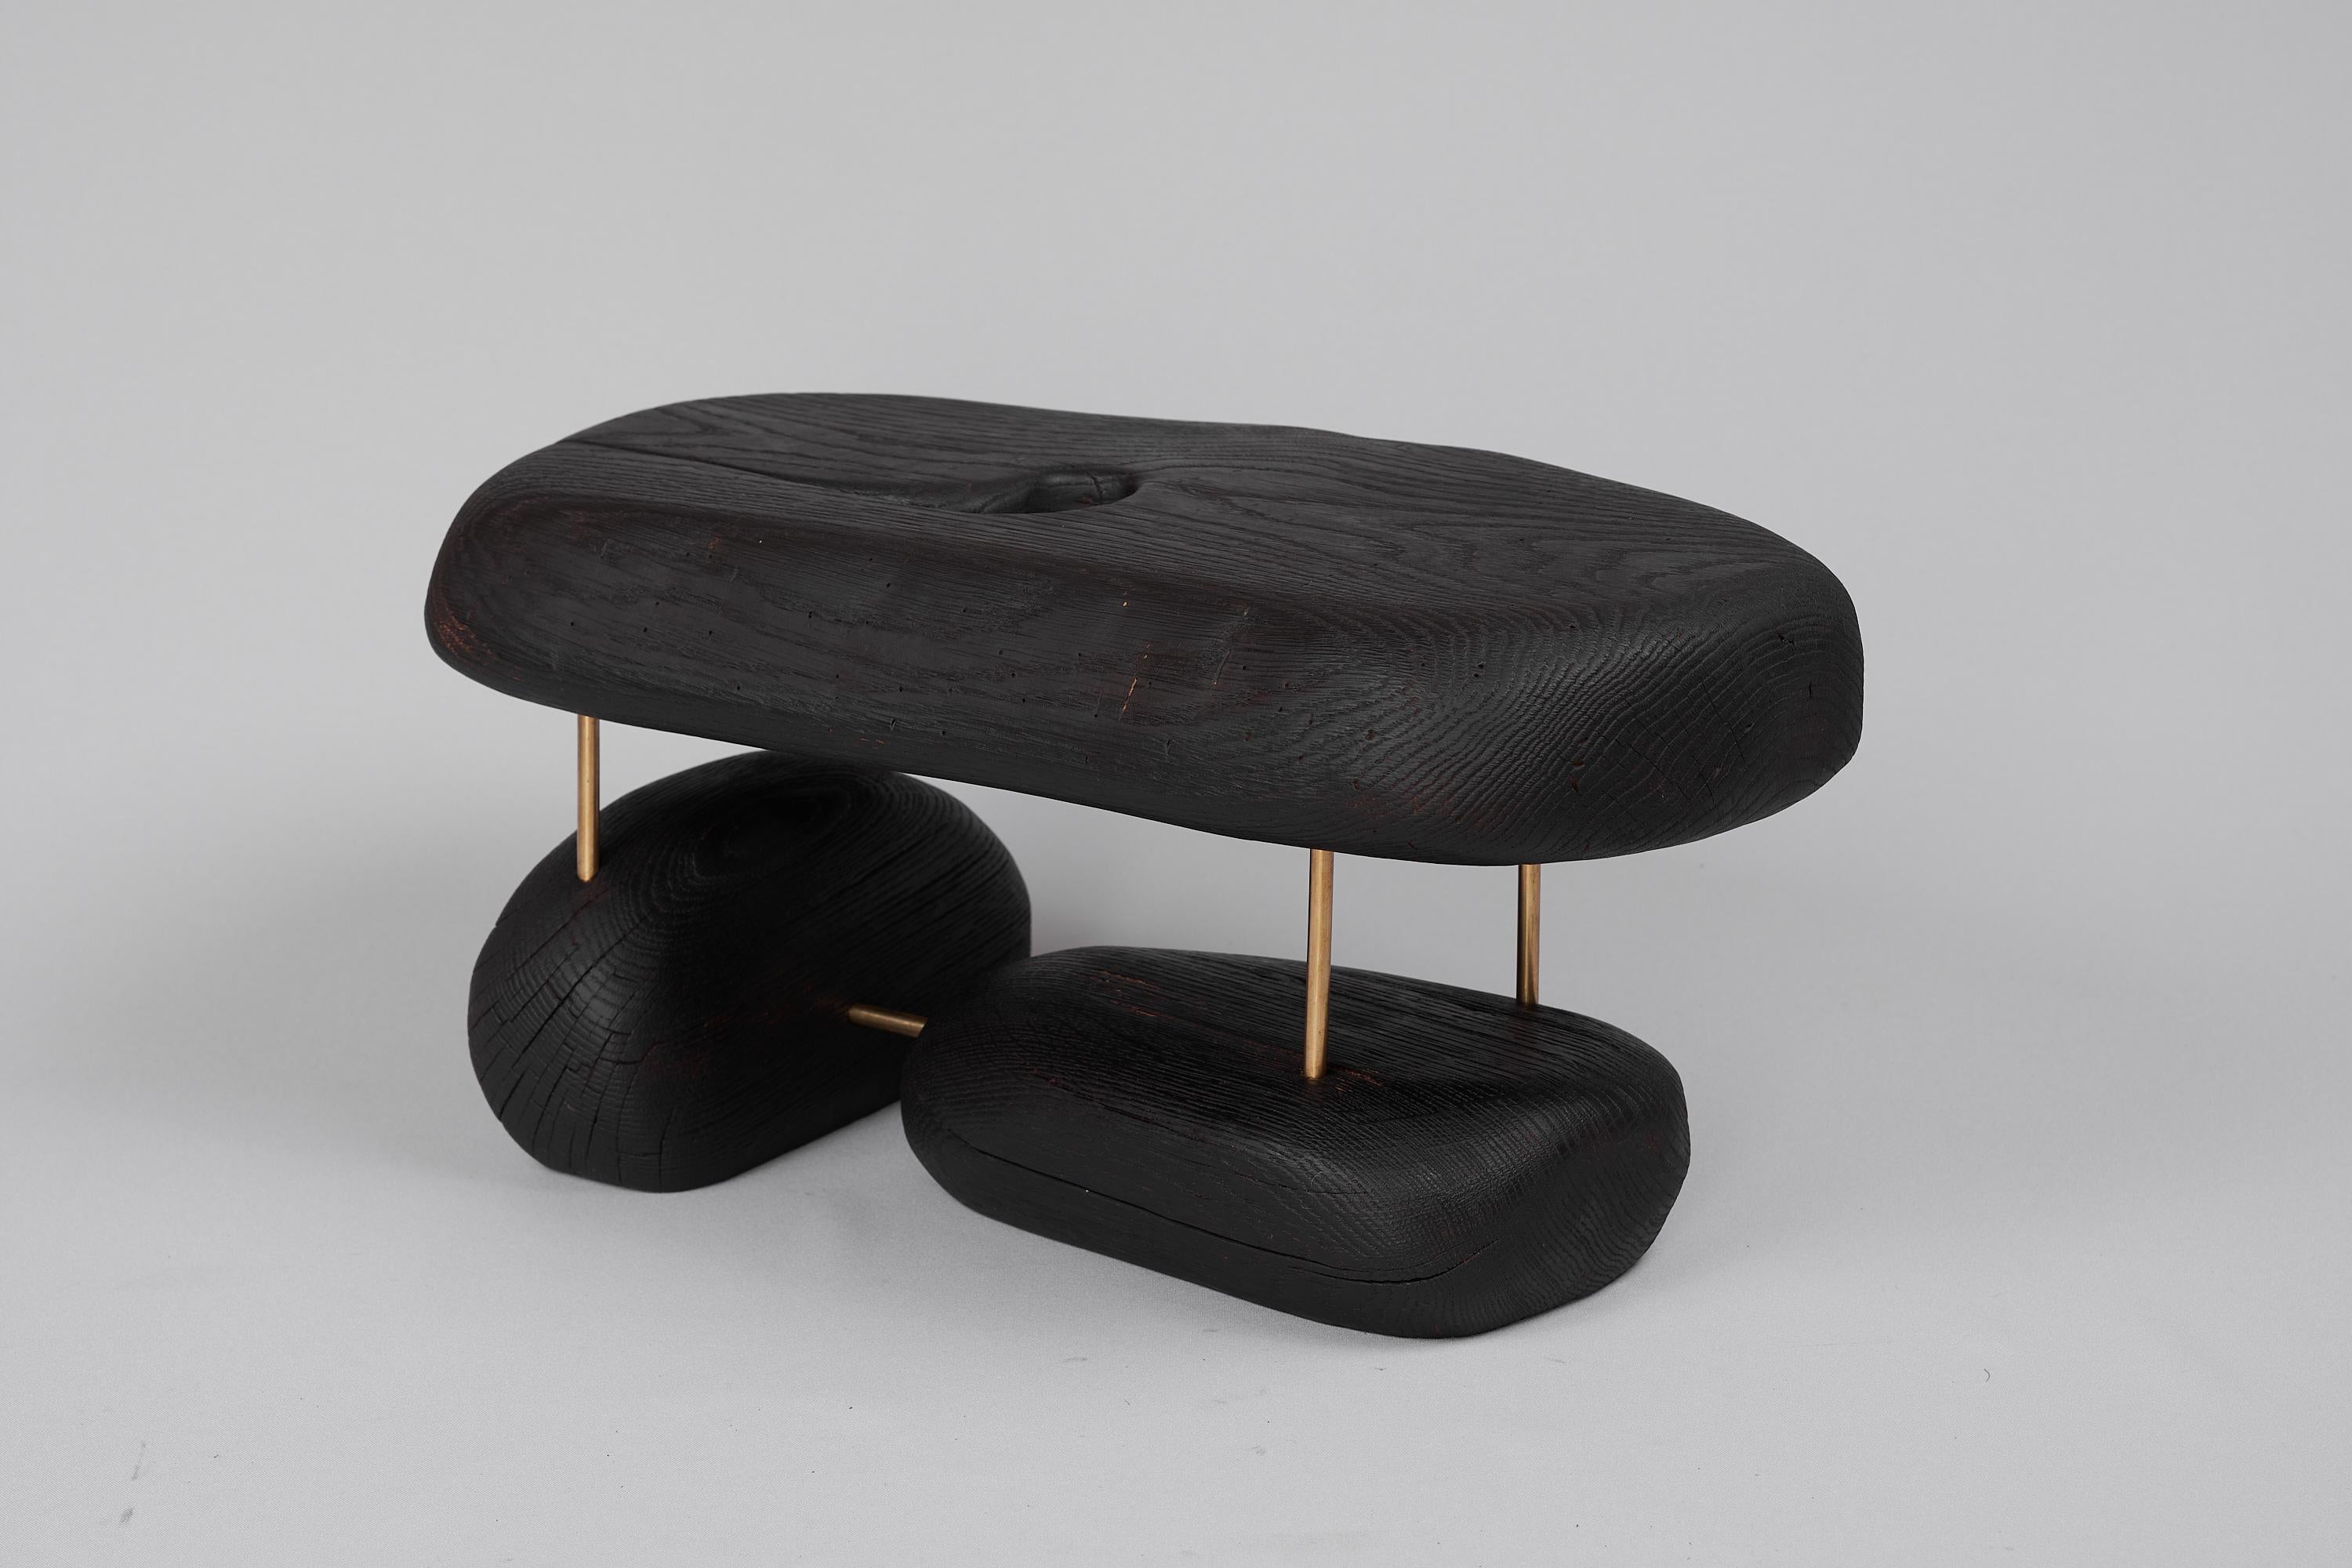 Hand-Crafted Original Contemporary Design, Burnt Oak with Brass, Unique Side Table, Logniture For Sale